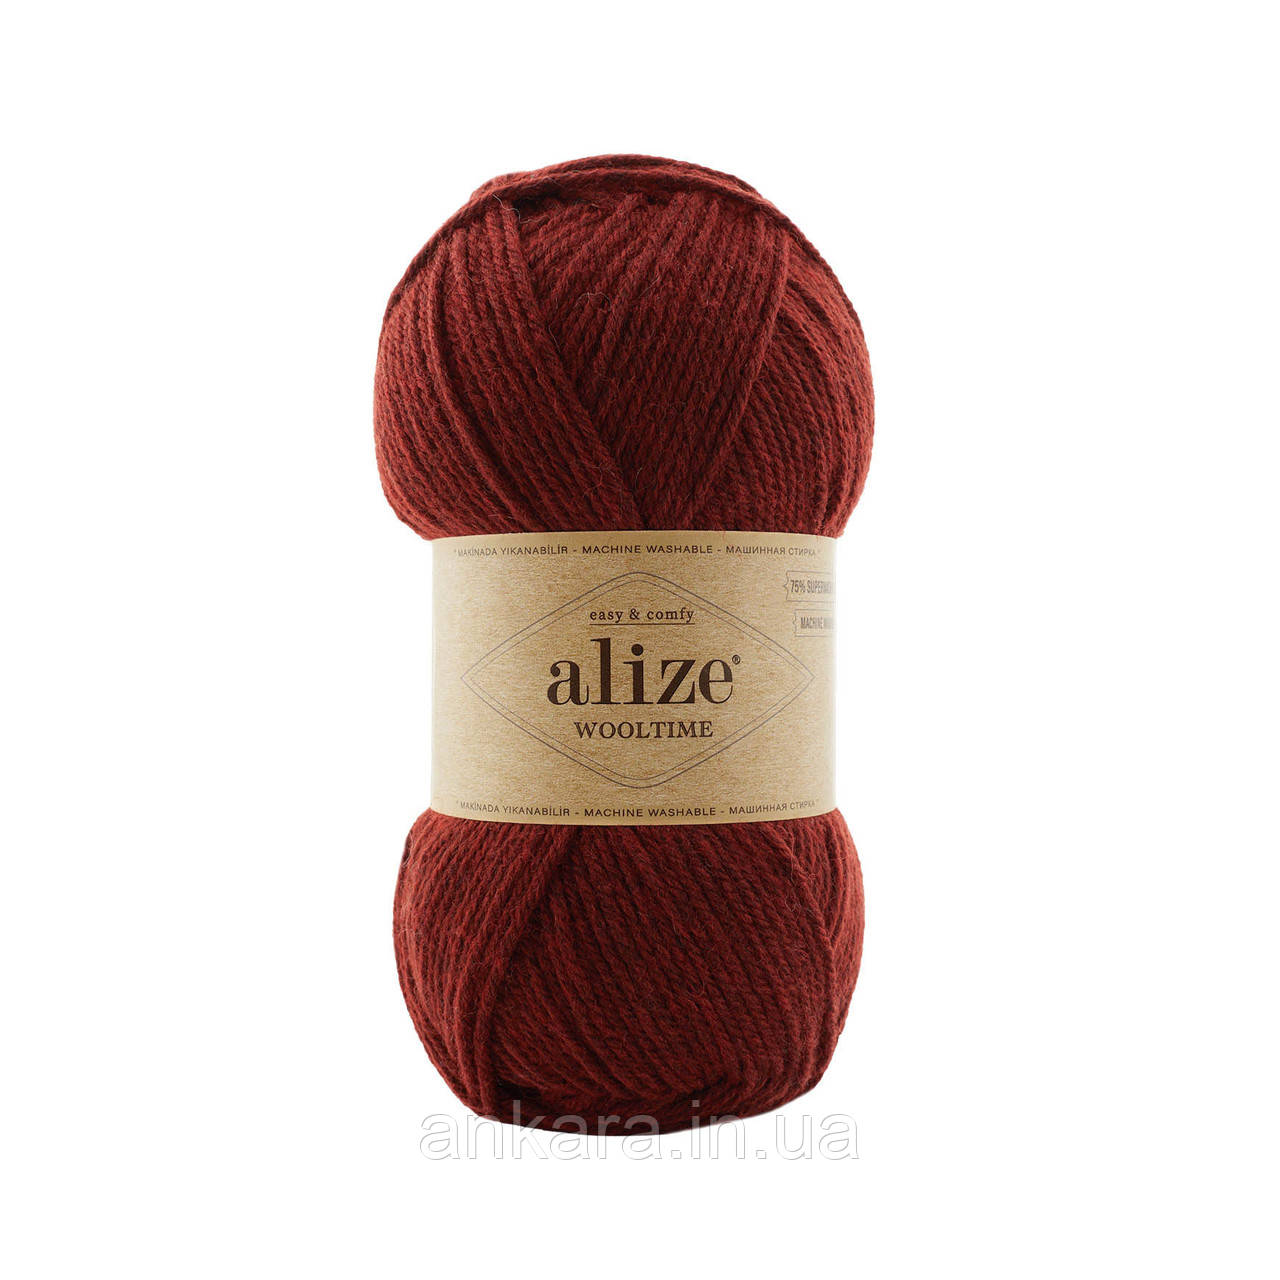 Alize Wooltime 588